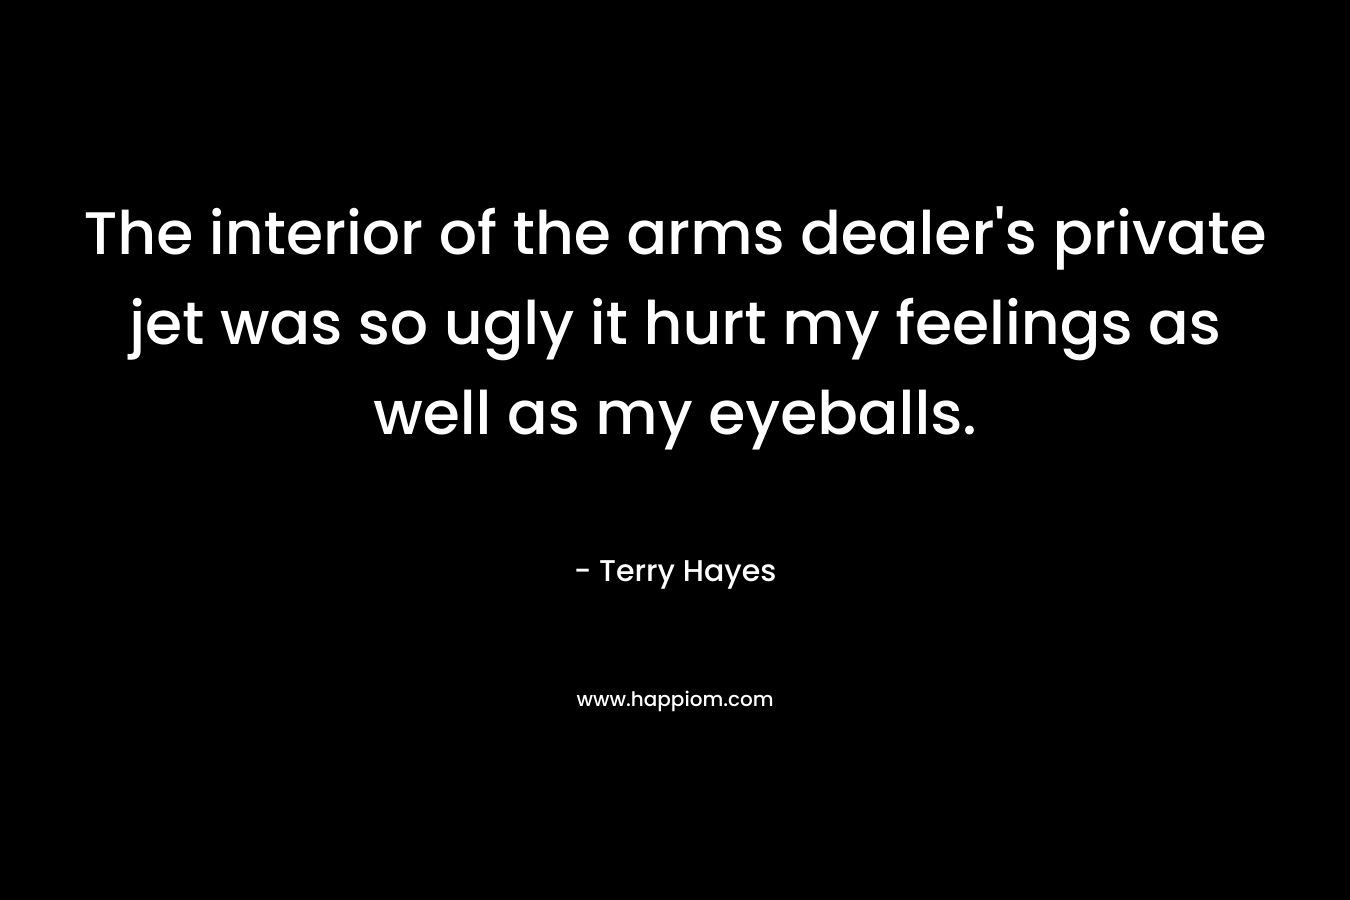 The interior of the arms dealer’s private jet was so ugly it hurt my feelings as well as my eyeballs. – Terry Hayes